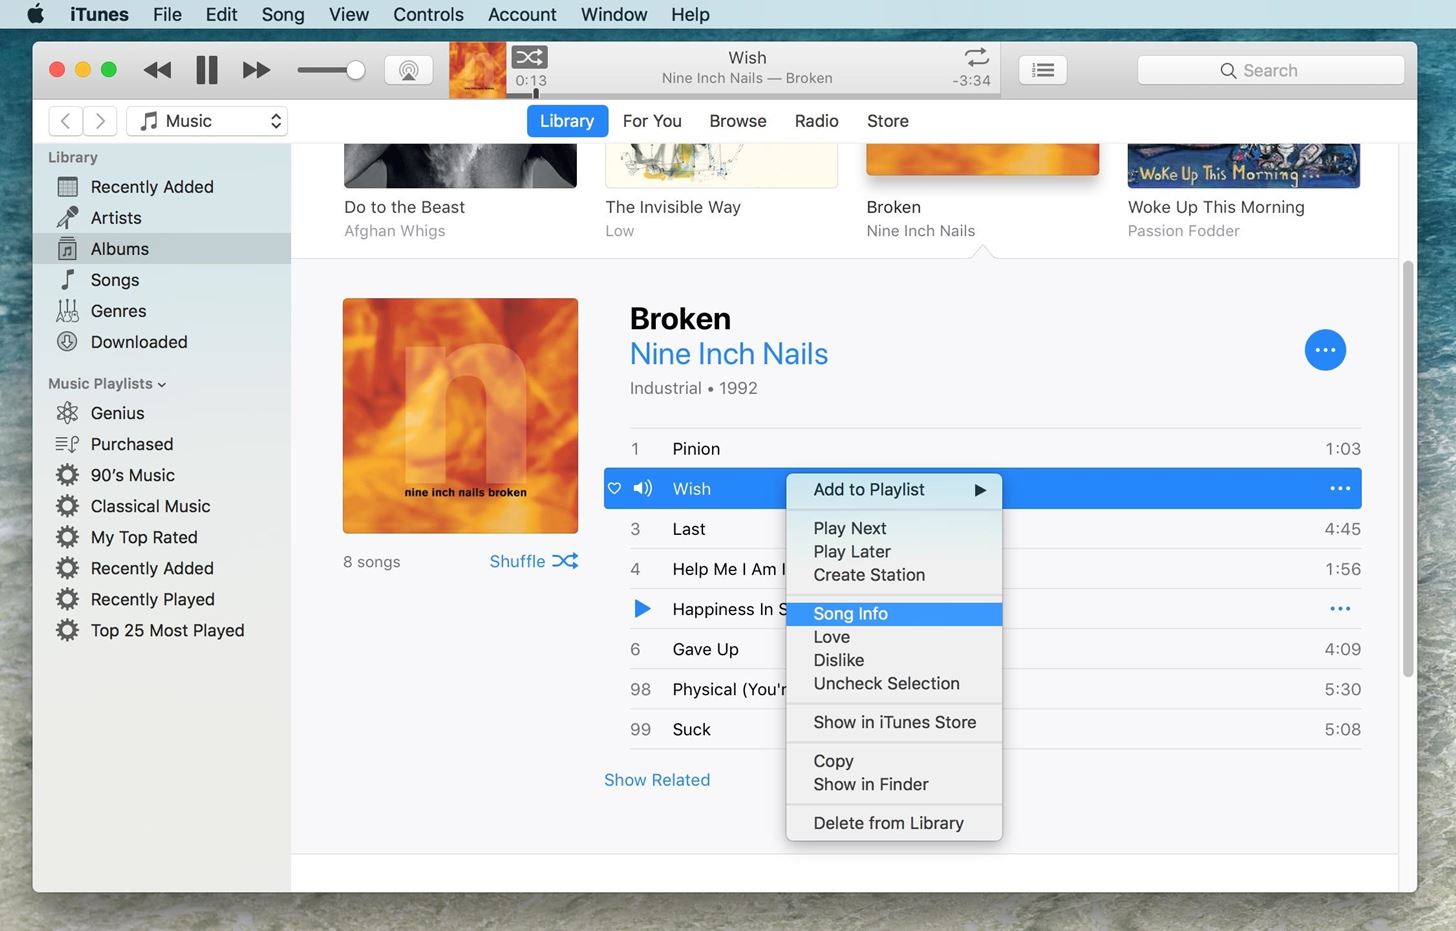 How to Make Custom Ringtones for Your iPhone from Any Songs You Already Own